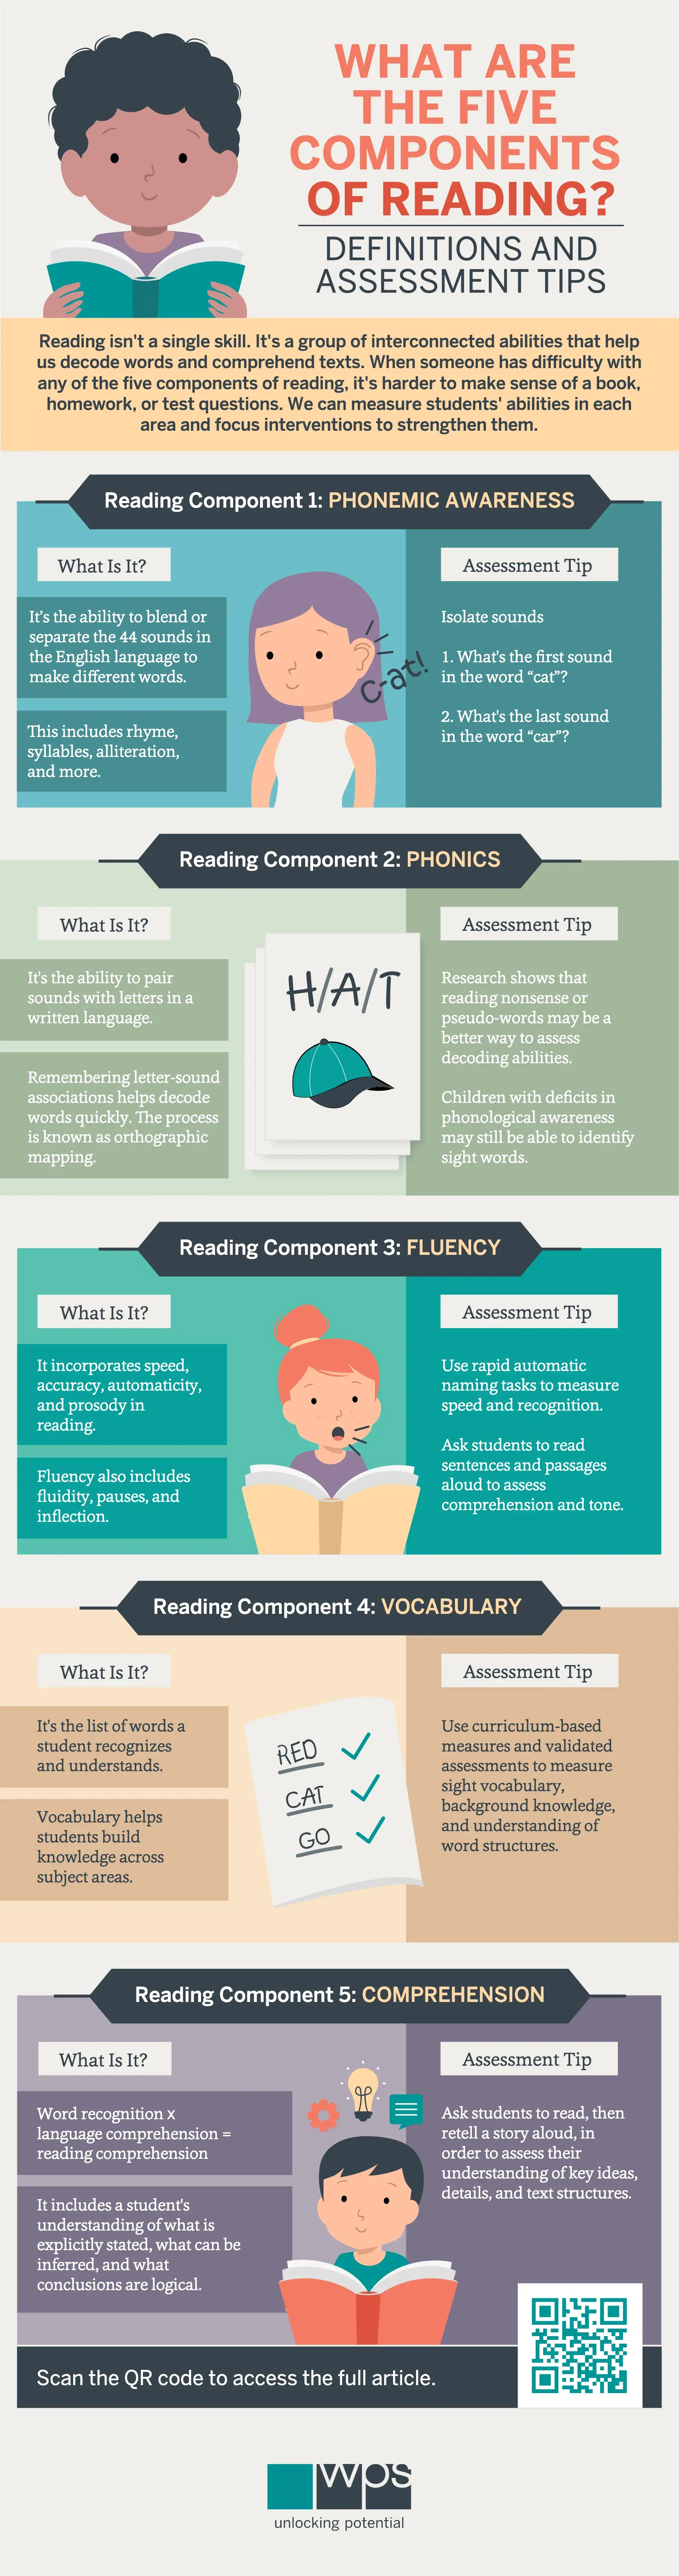 What are the Five Components of Reading?